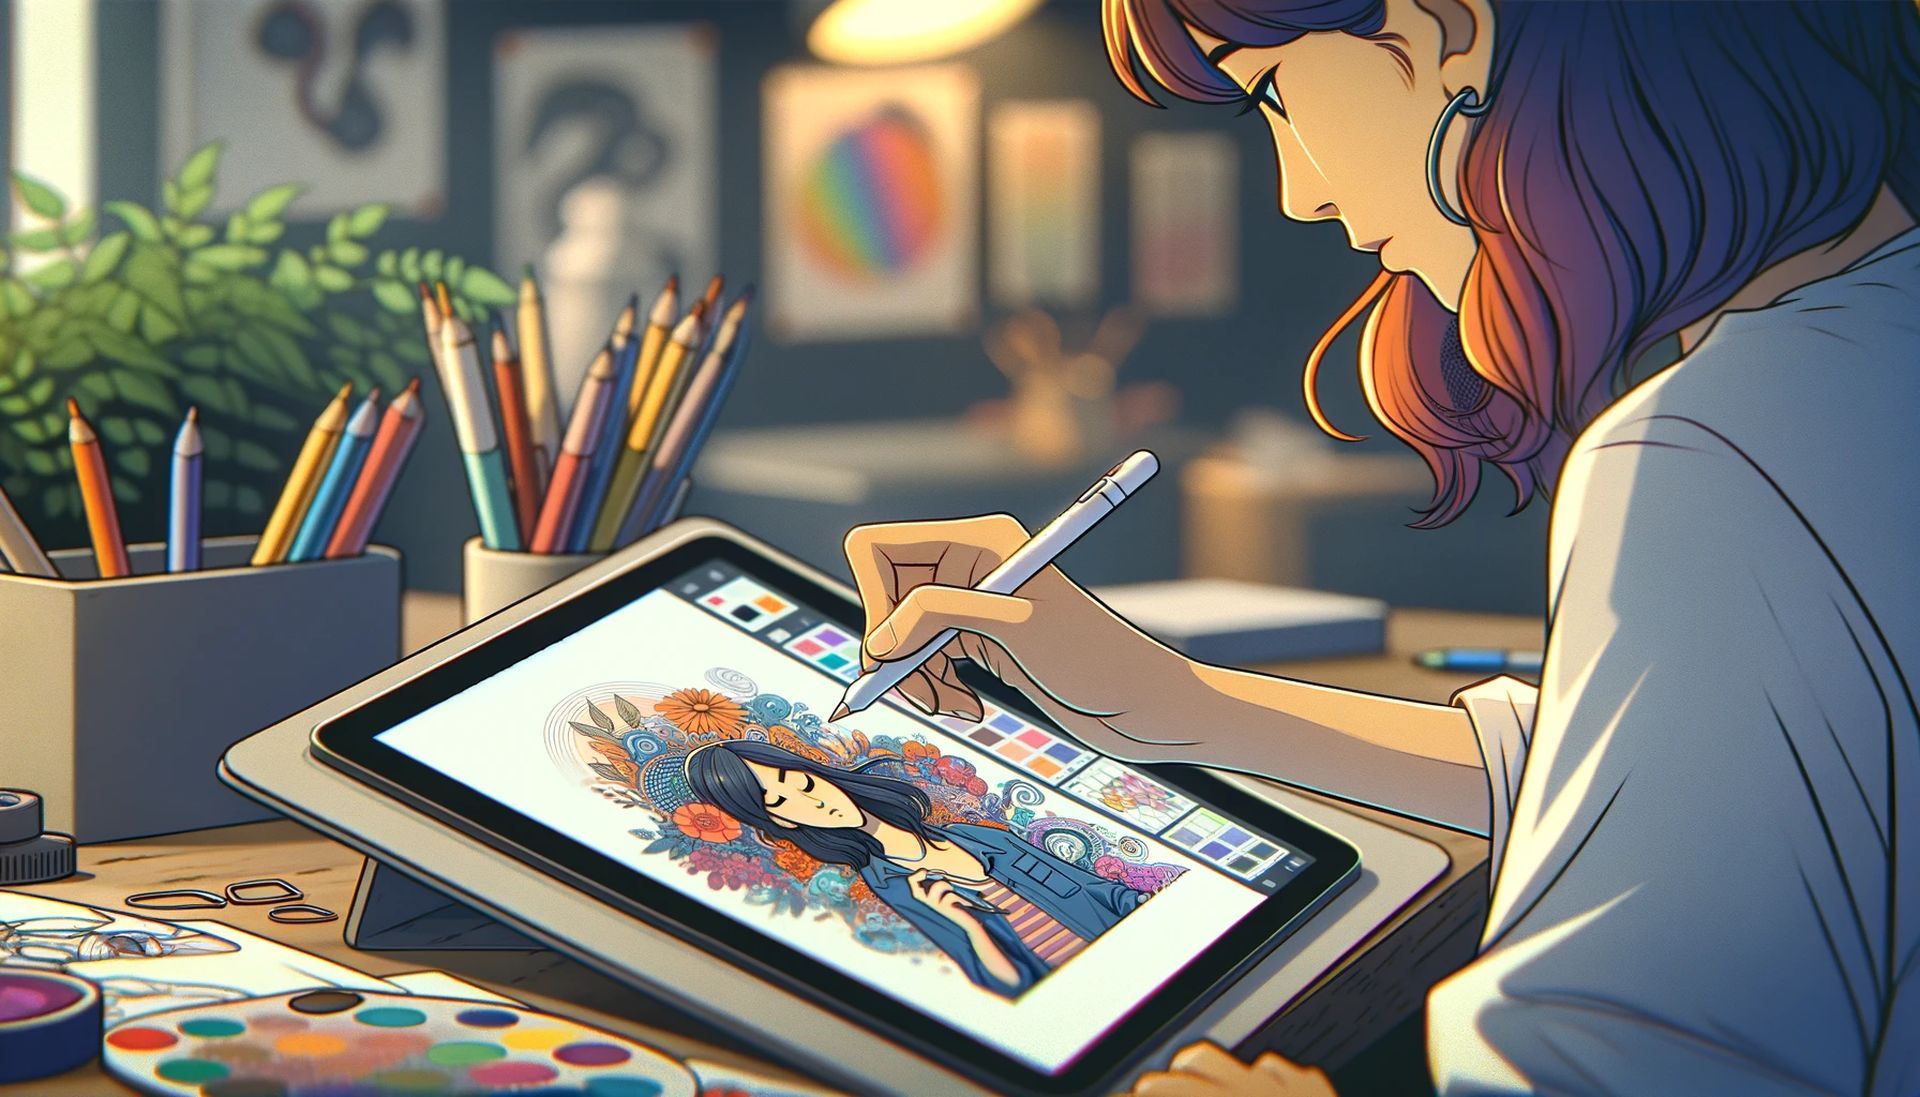 Krea AI is about to add live painting in its rich feature pallette